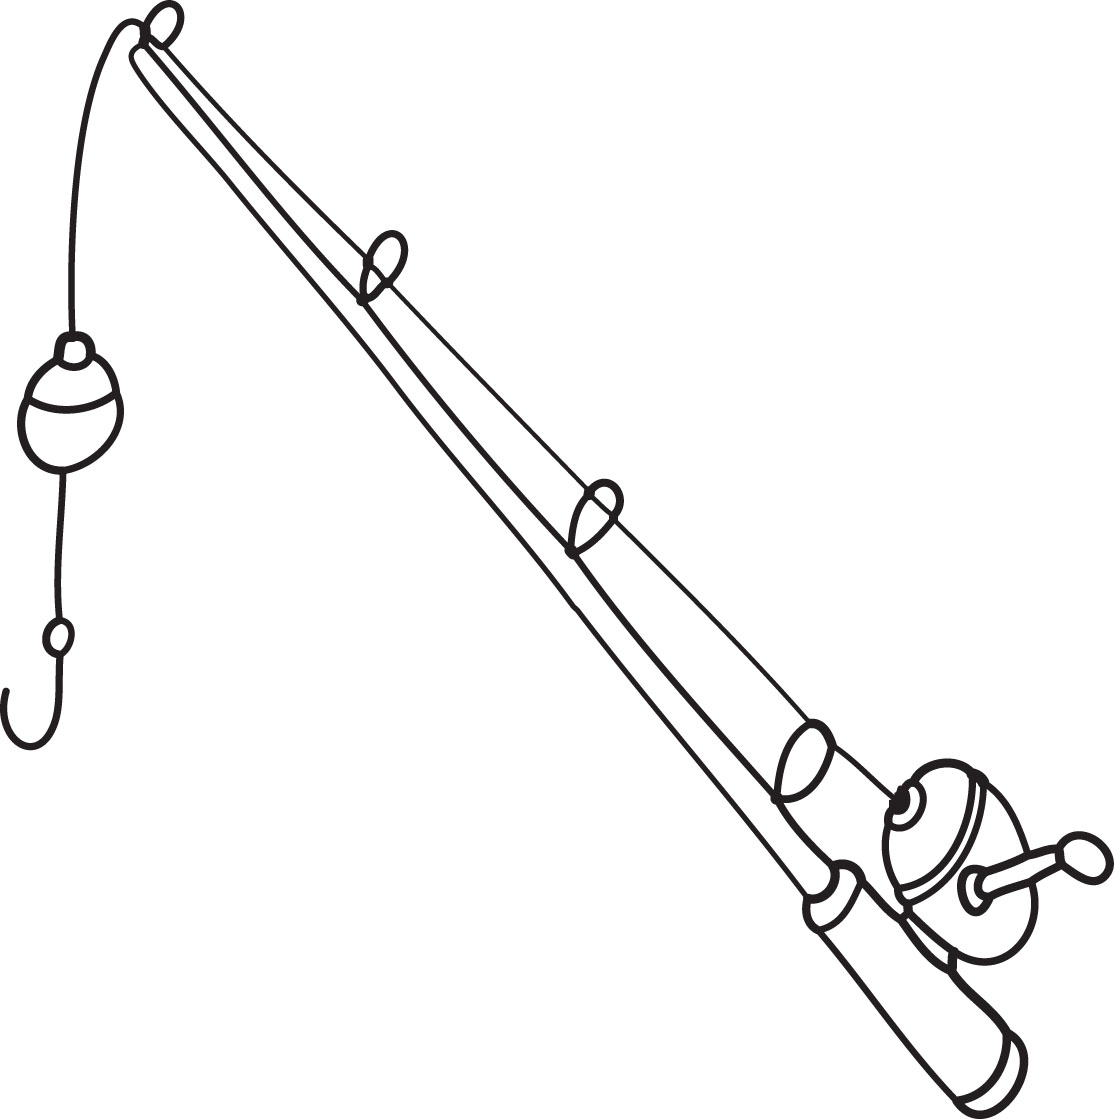 Fishing Pole Coloring Page ClipArt Best